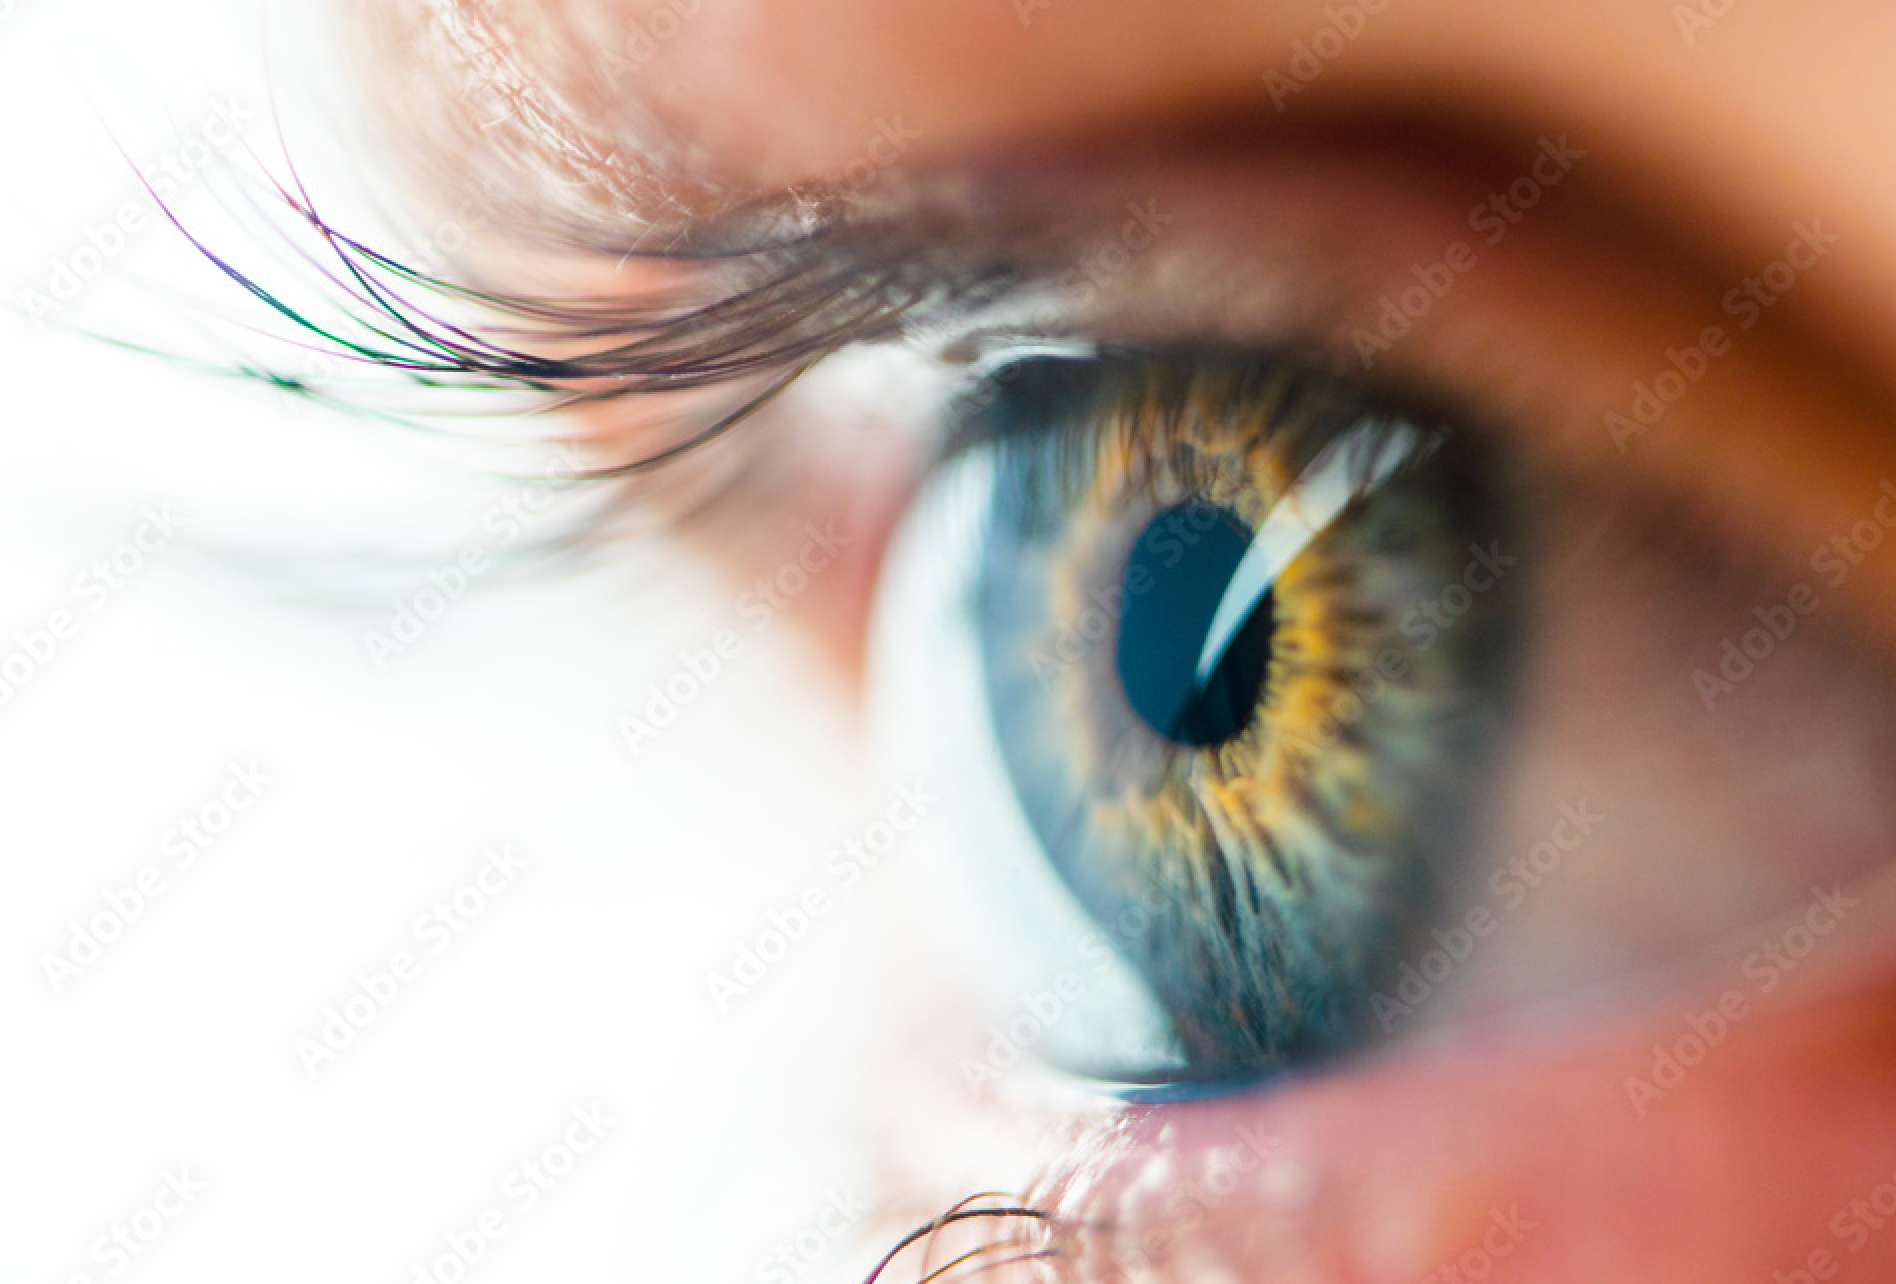 Diabetes is the leading cause of new blindness among adults from 18 to 64. 